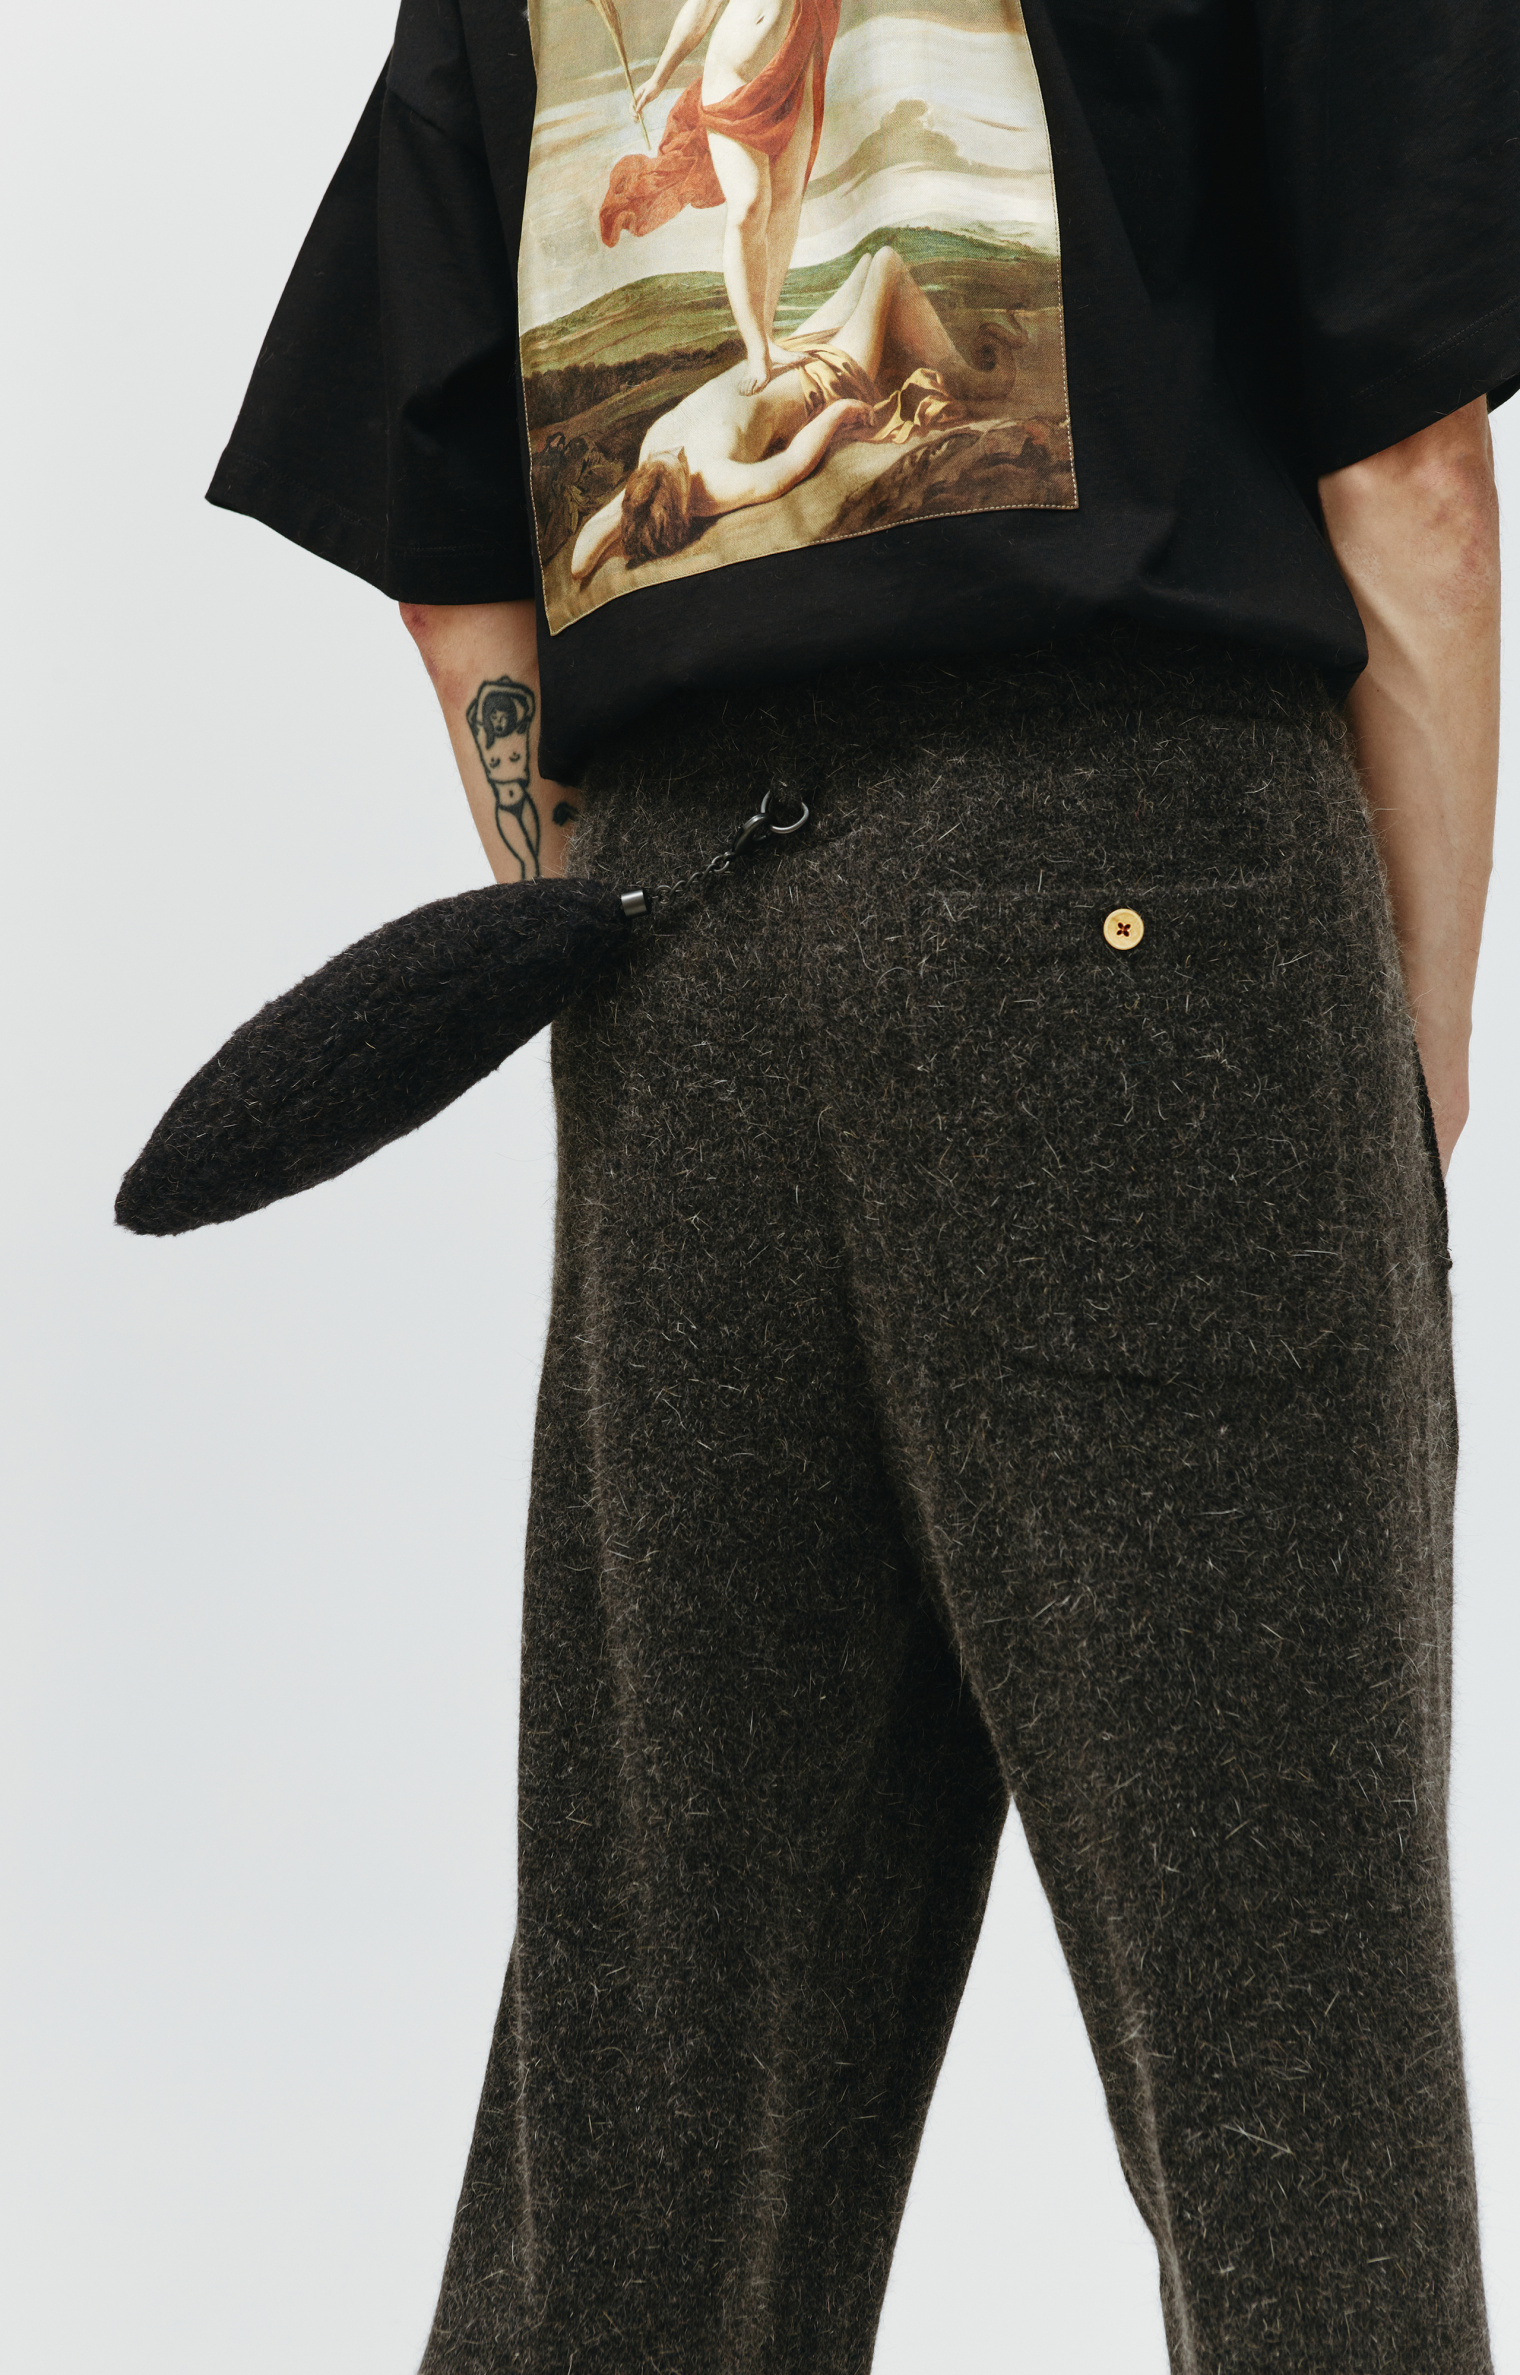 Doublet Wool sweatpants with charm